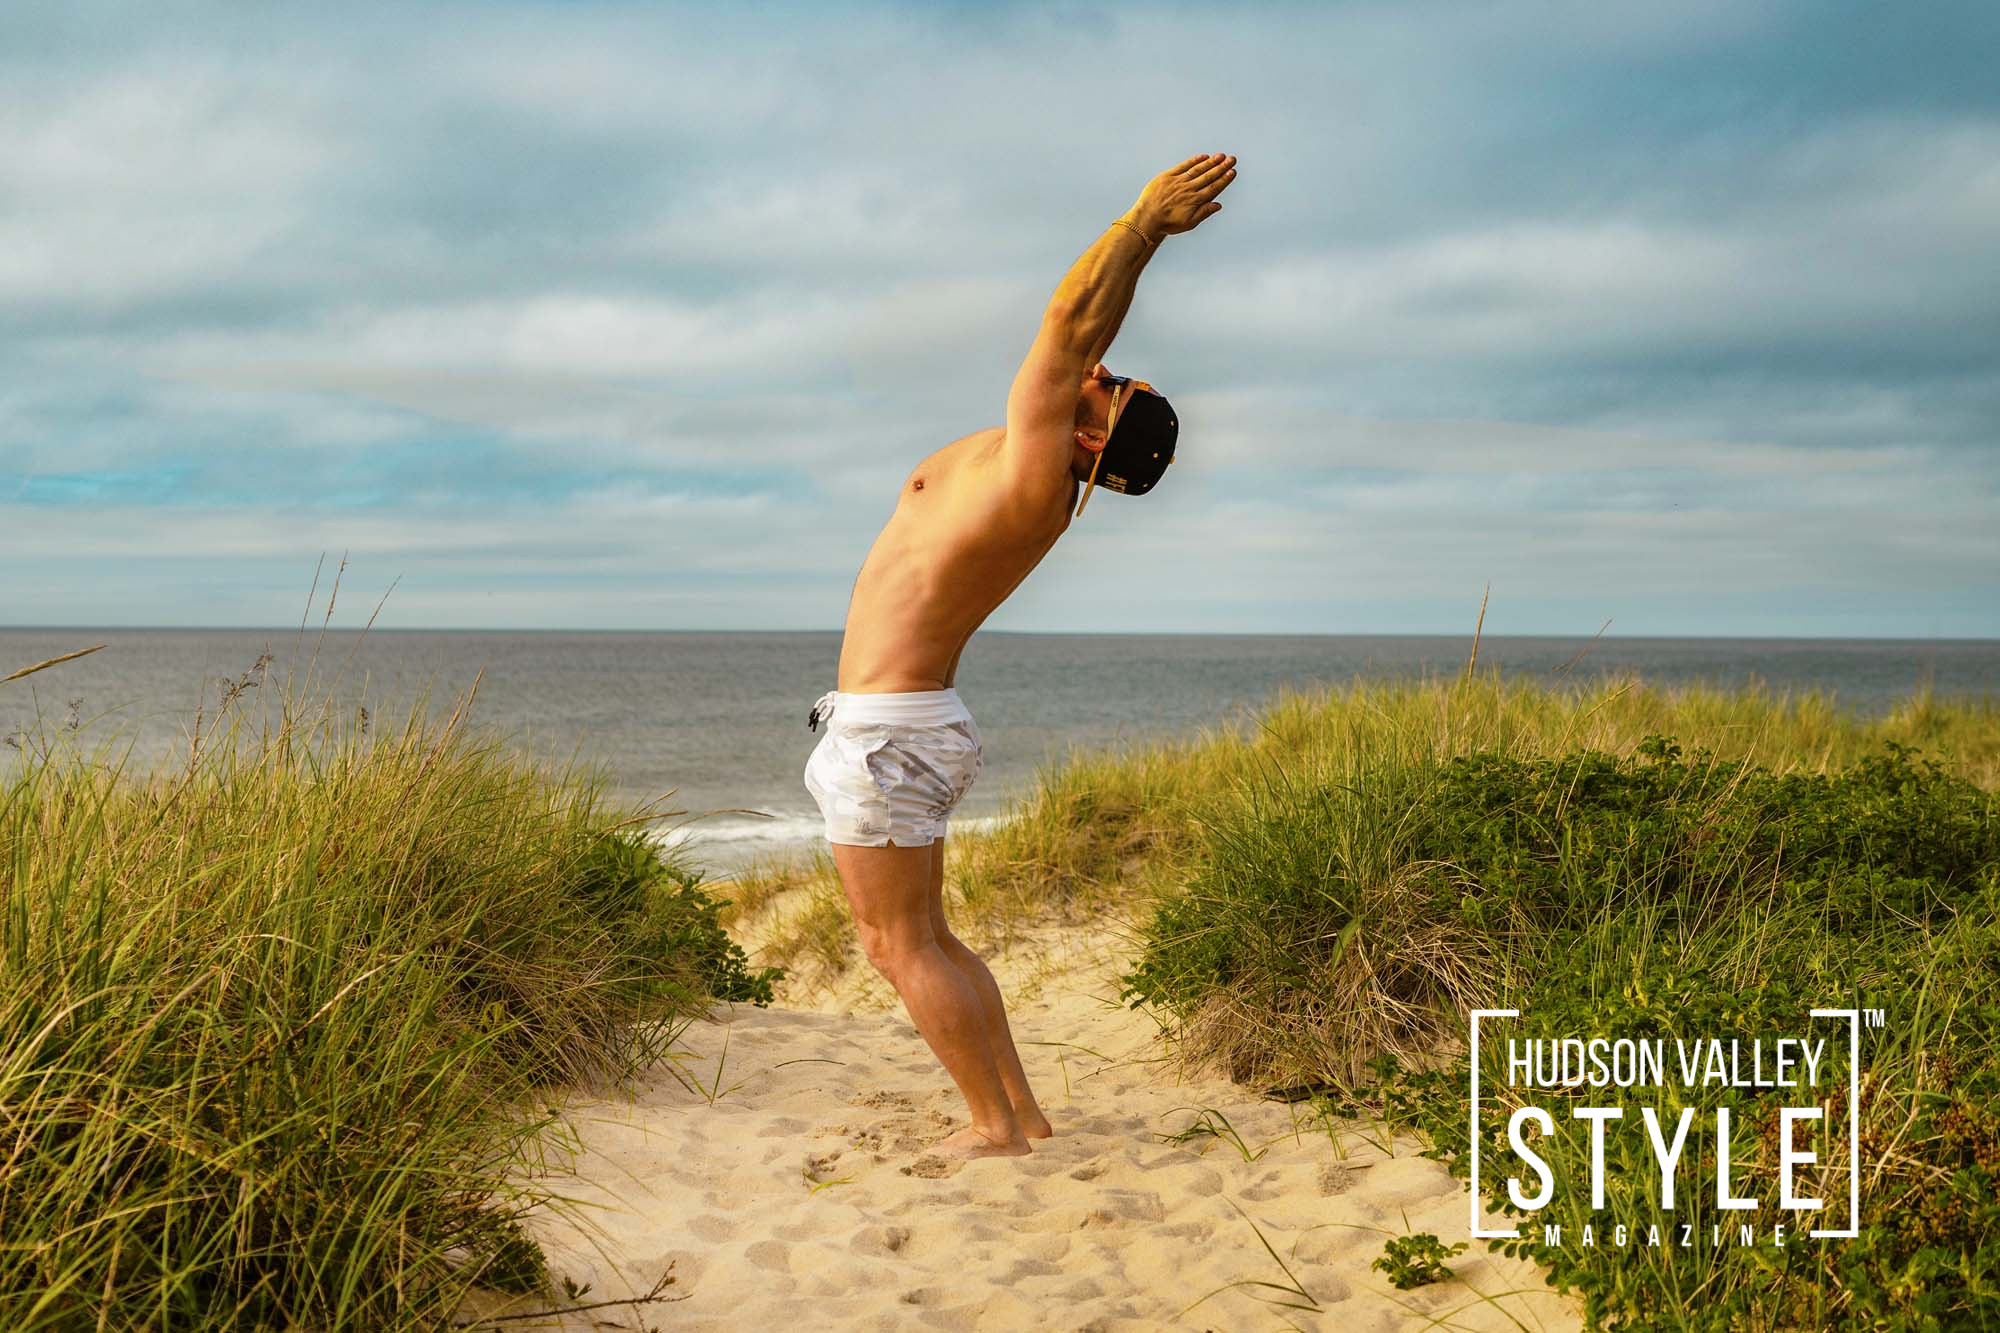 Maxwell Alexander’s Ultimate Guide to a Blissful Hamptons Vacation: Free Beach Yoga Class for All – Wellness Travel with Bodybuilding Coach Maxwell Alexander – Presented by Alluvion Vacations